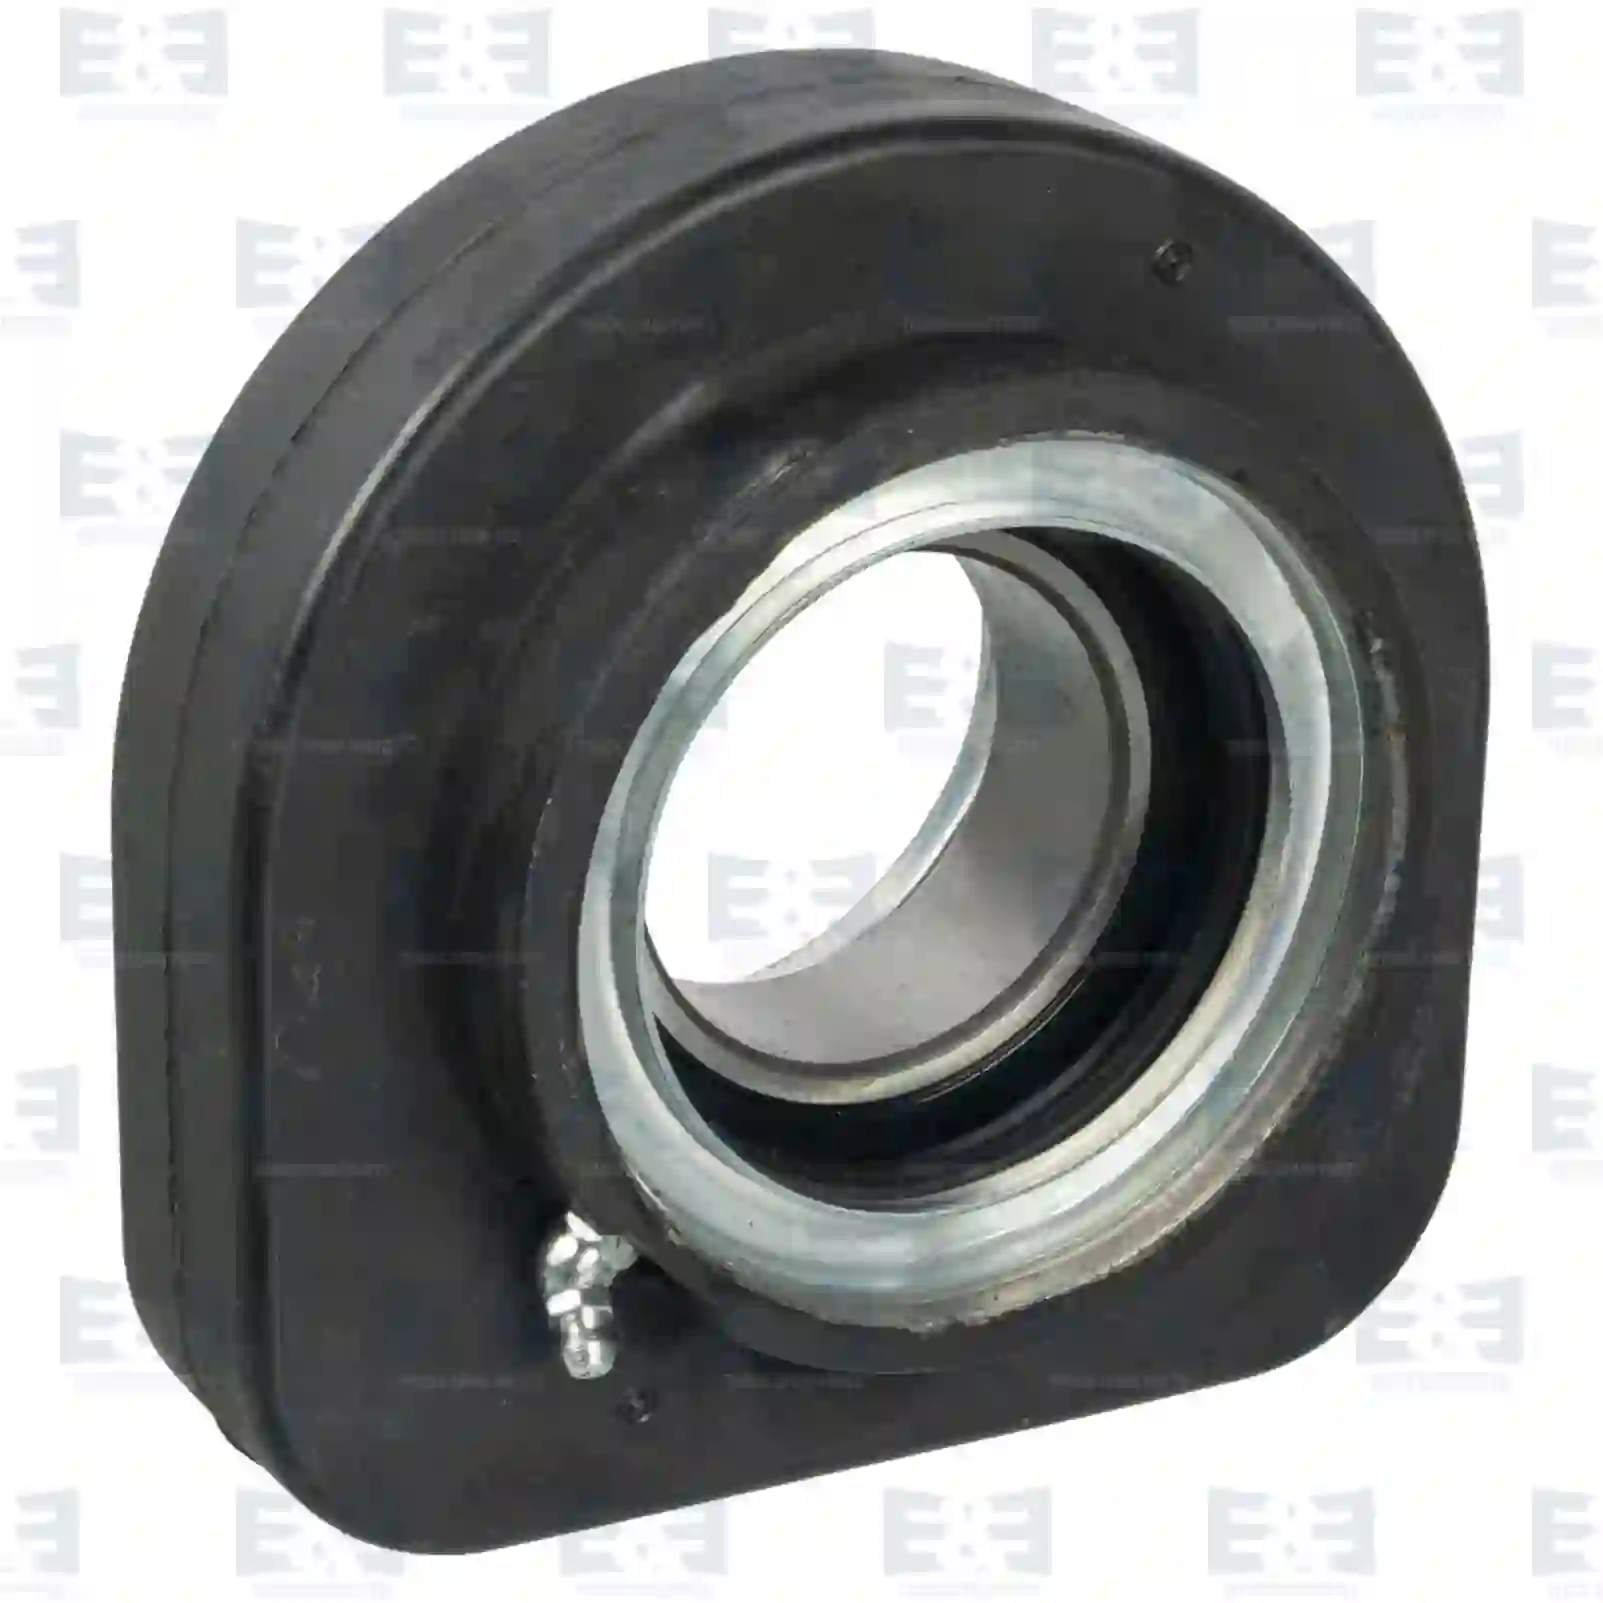 Support Bearing Center bearing, EE No 2E2276988 ,  oem no:1696389, 263000, ZG02473-0008 E&E Truck Spare Parts | Truck Spare Parts, Auotomotive Spare Parts